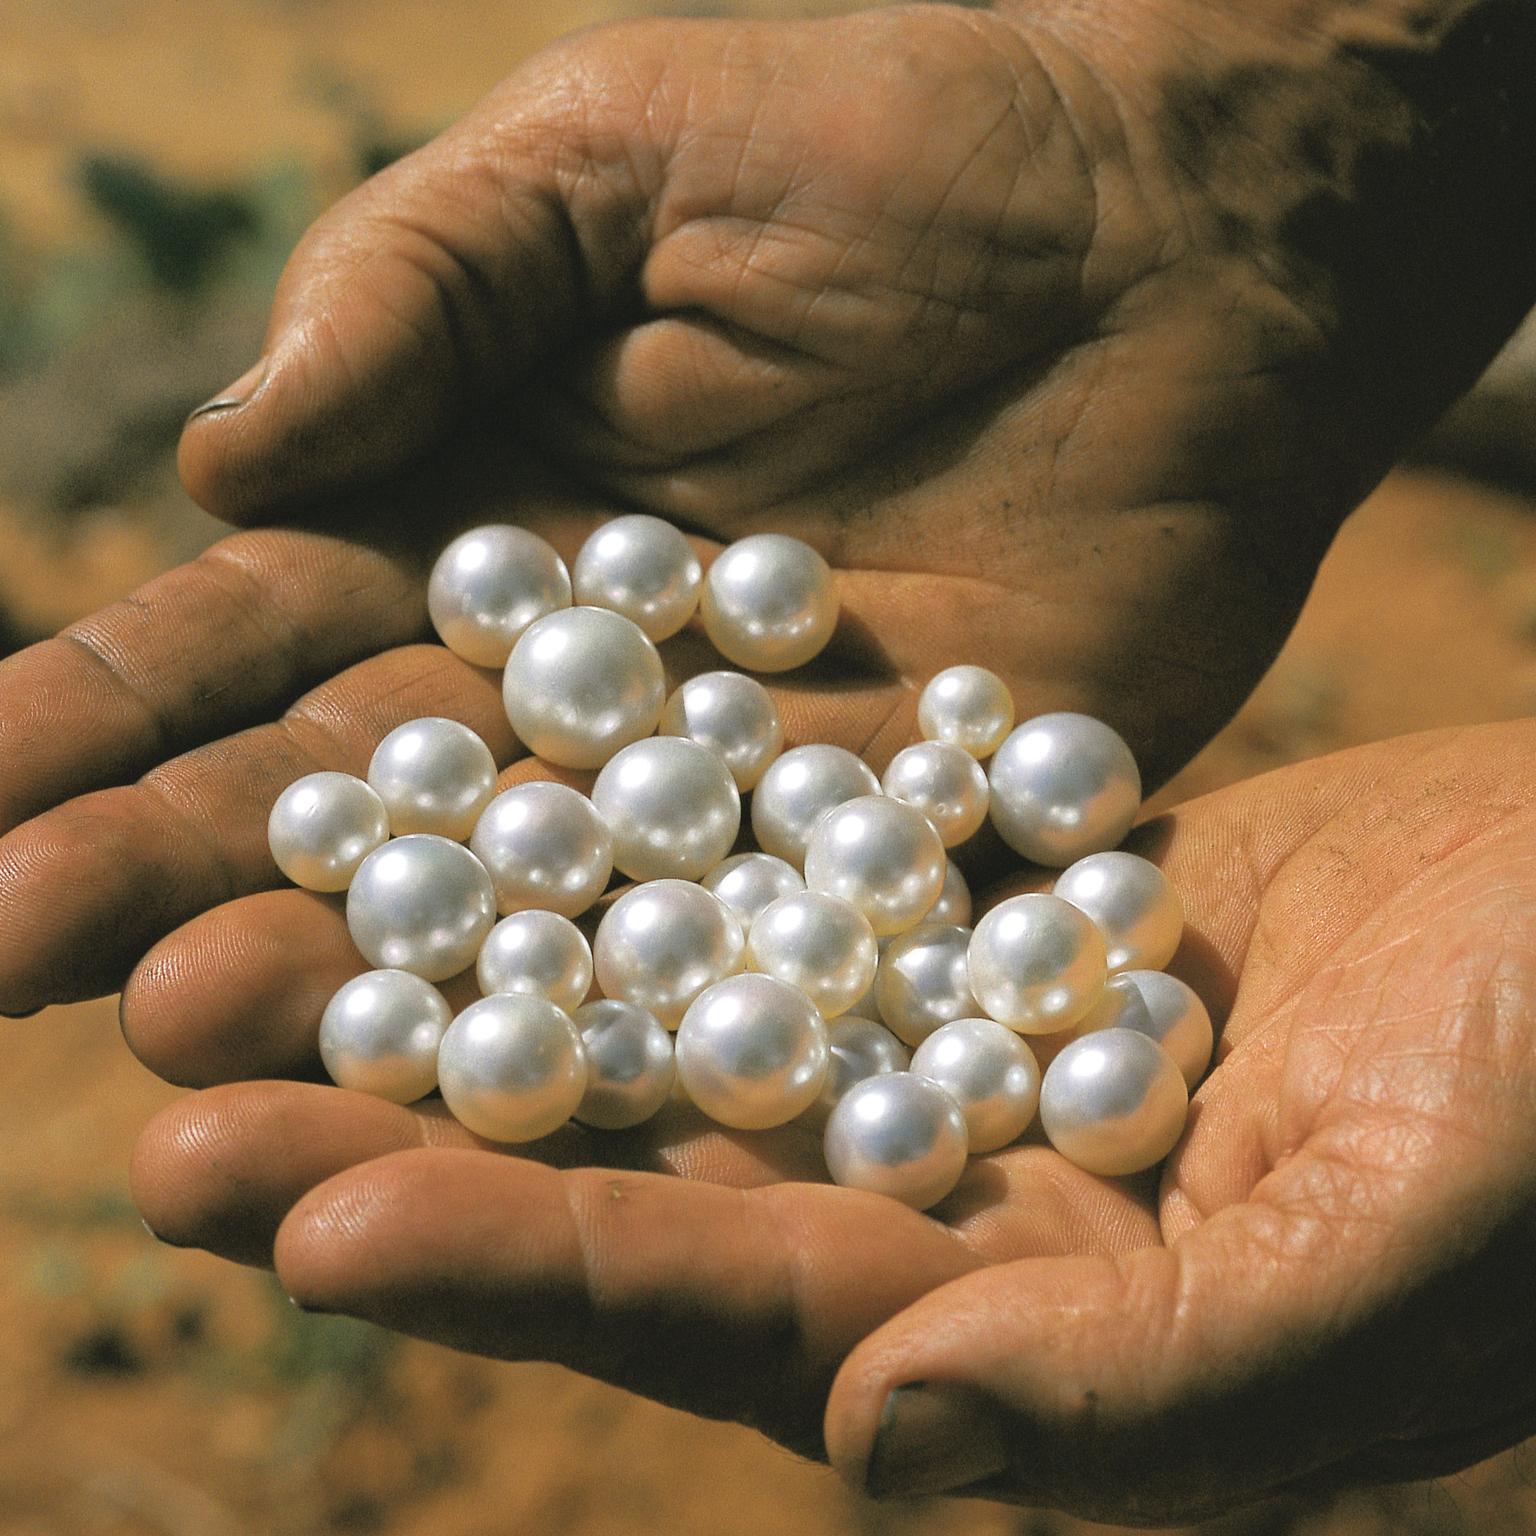 What Do Pearls Symbolize? The Meaning and History of Pearls